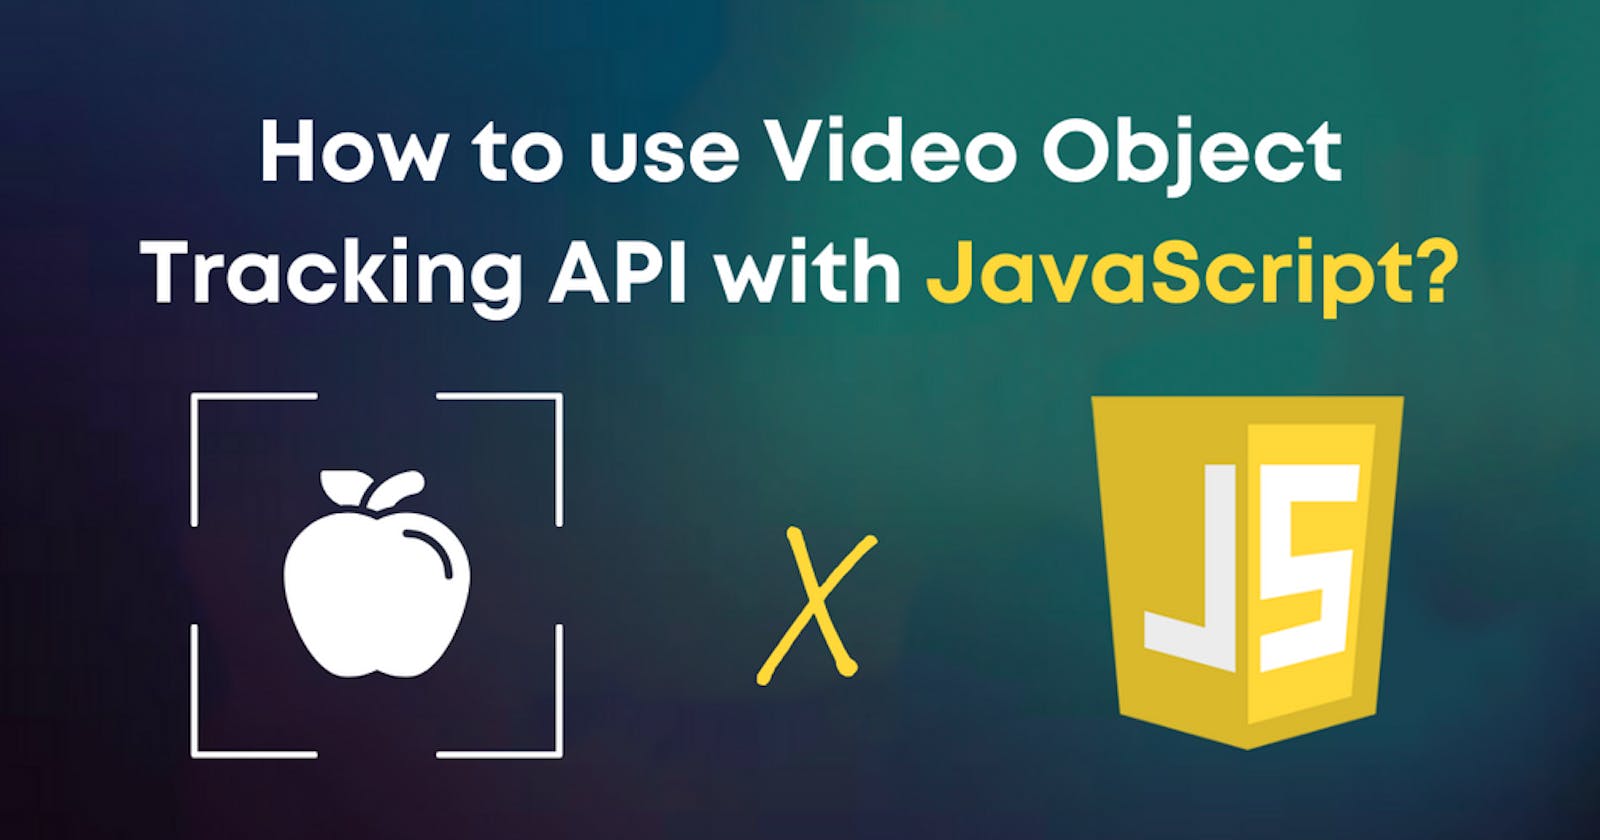 How to use Video Object Tracking API with JavaScript in 5 minutes?